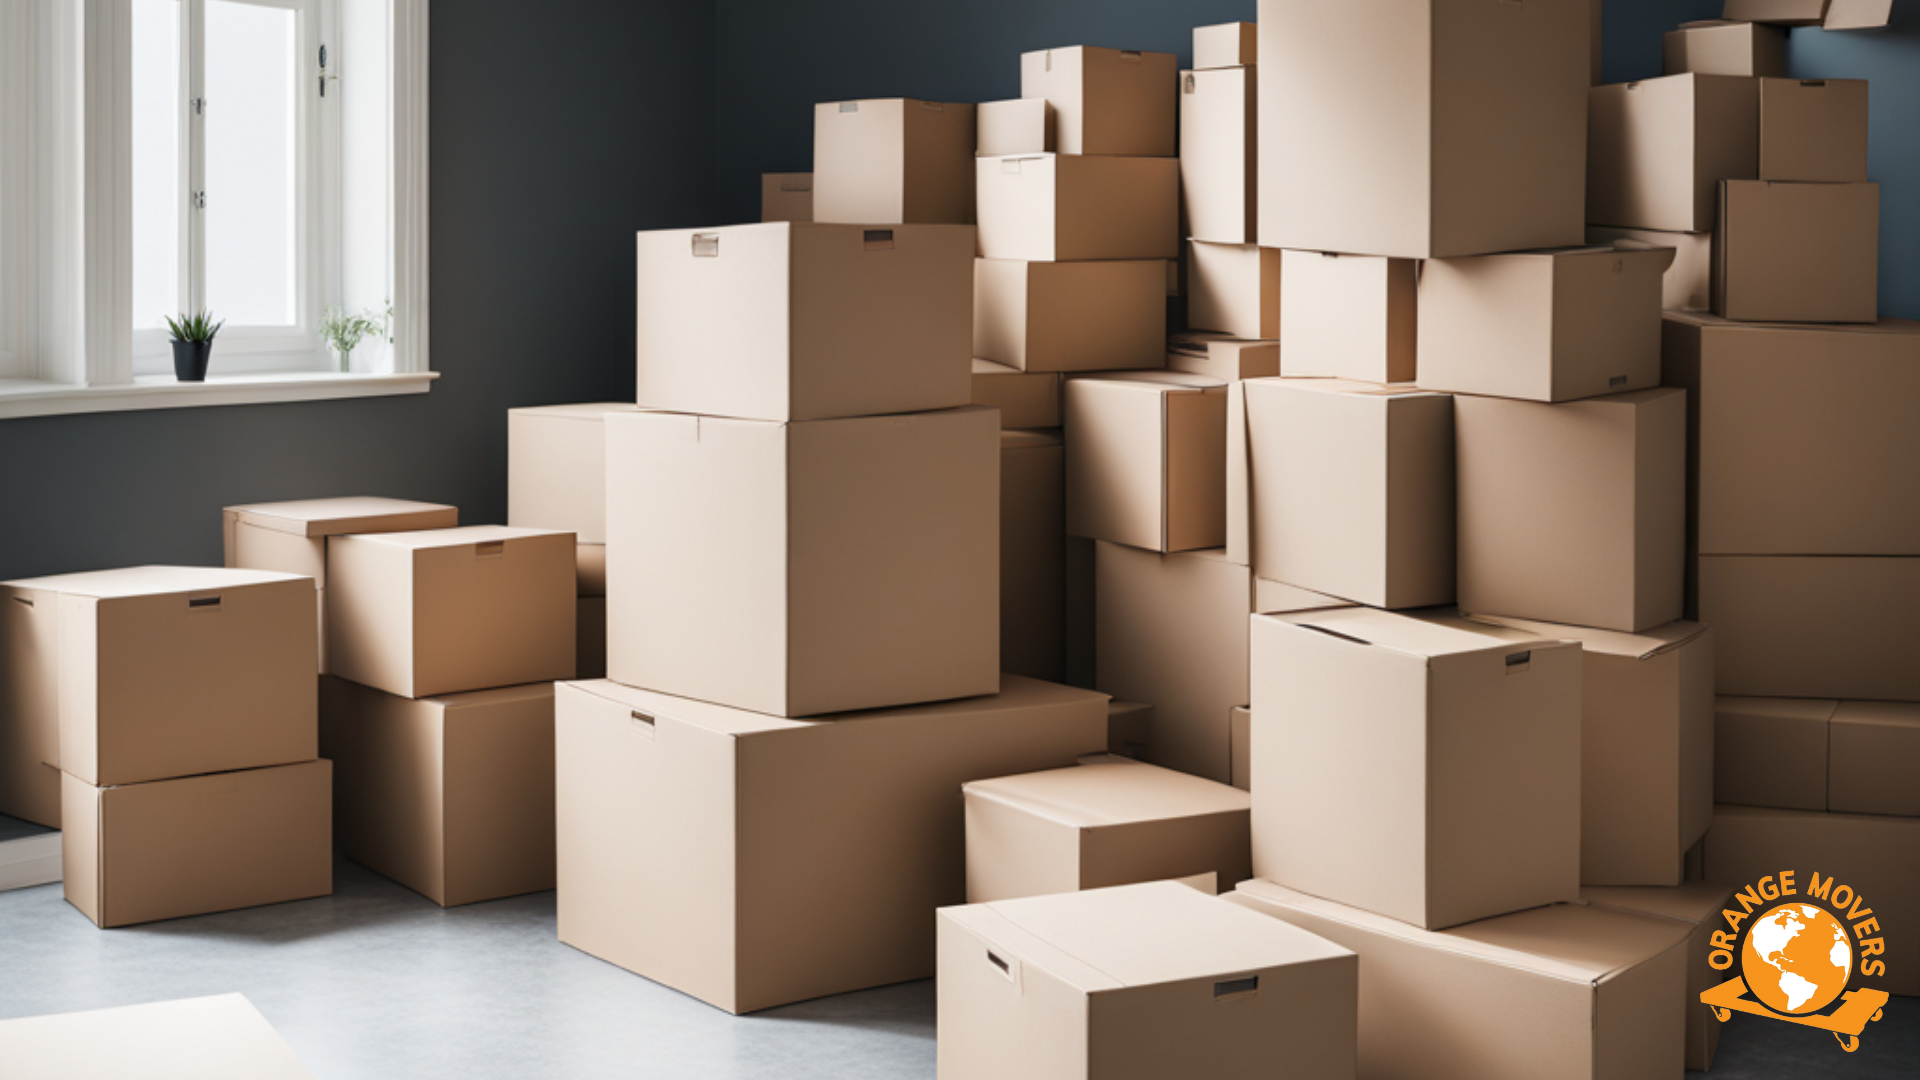 Packing and Moving Movers Companies in Palm Beach County Florida